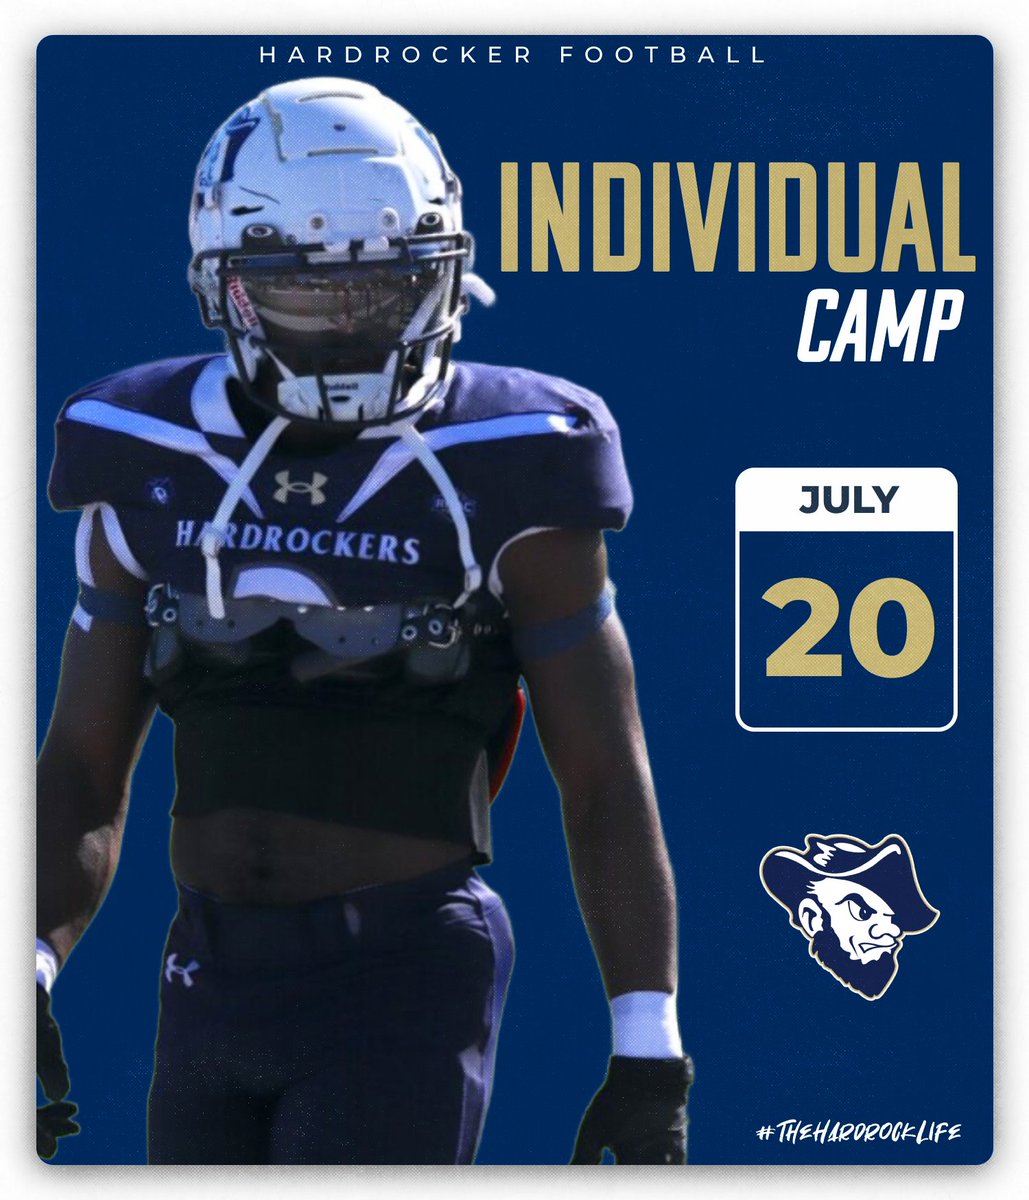 July 20th, Come Out To The Black Hills To Compete And Experience Hardrocker Country! #TheHardrockLife 

(Registration) hardrockerfootballcamps.com/register.cfm